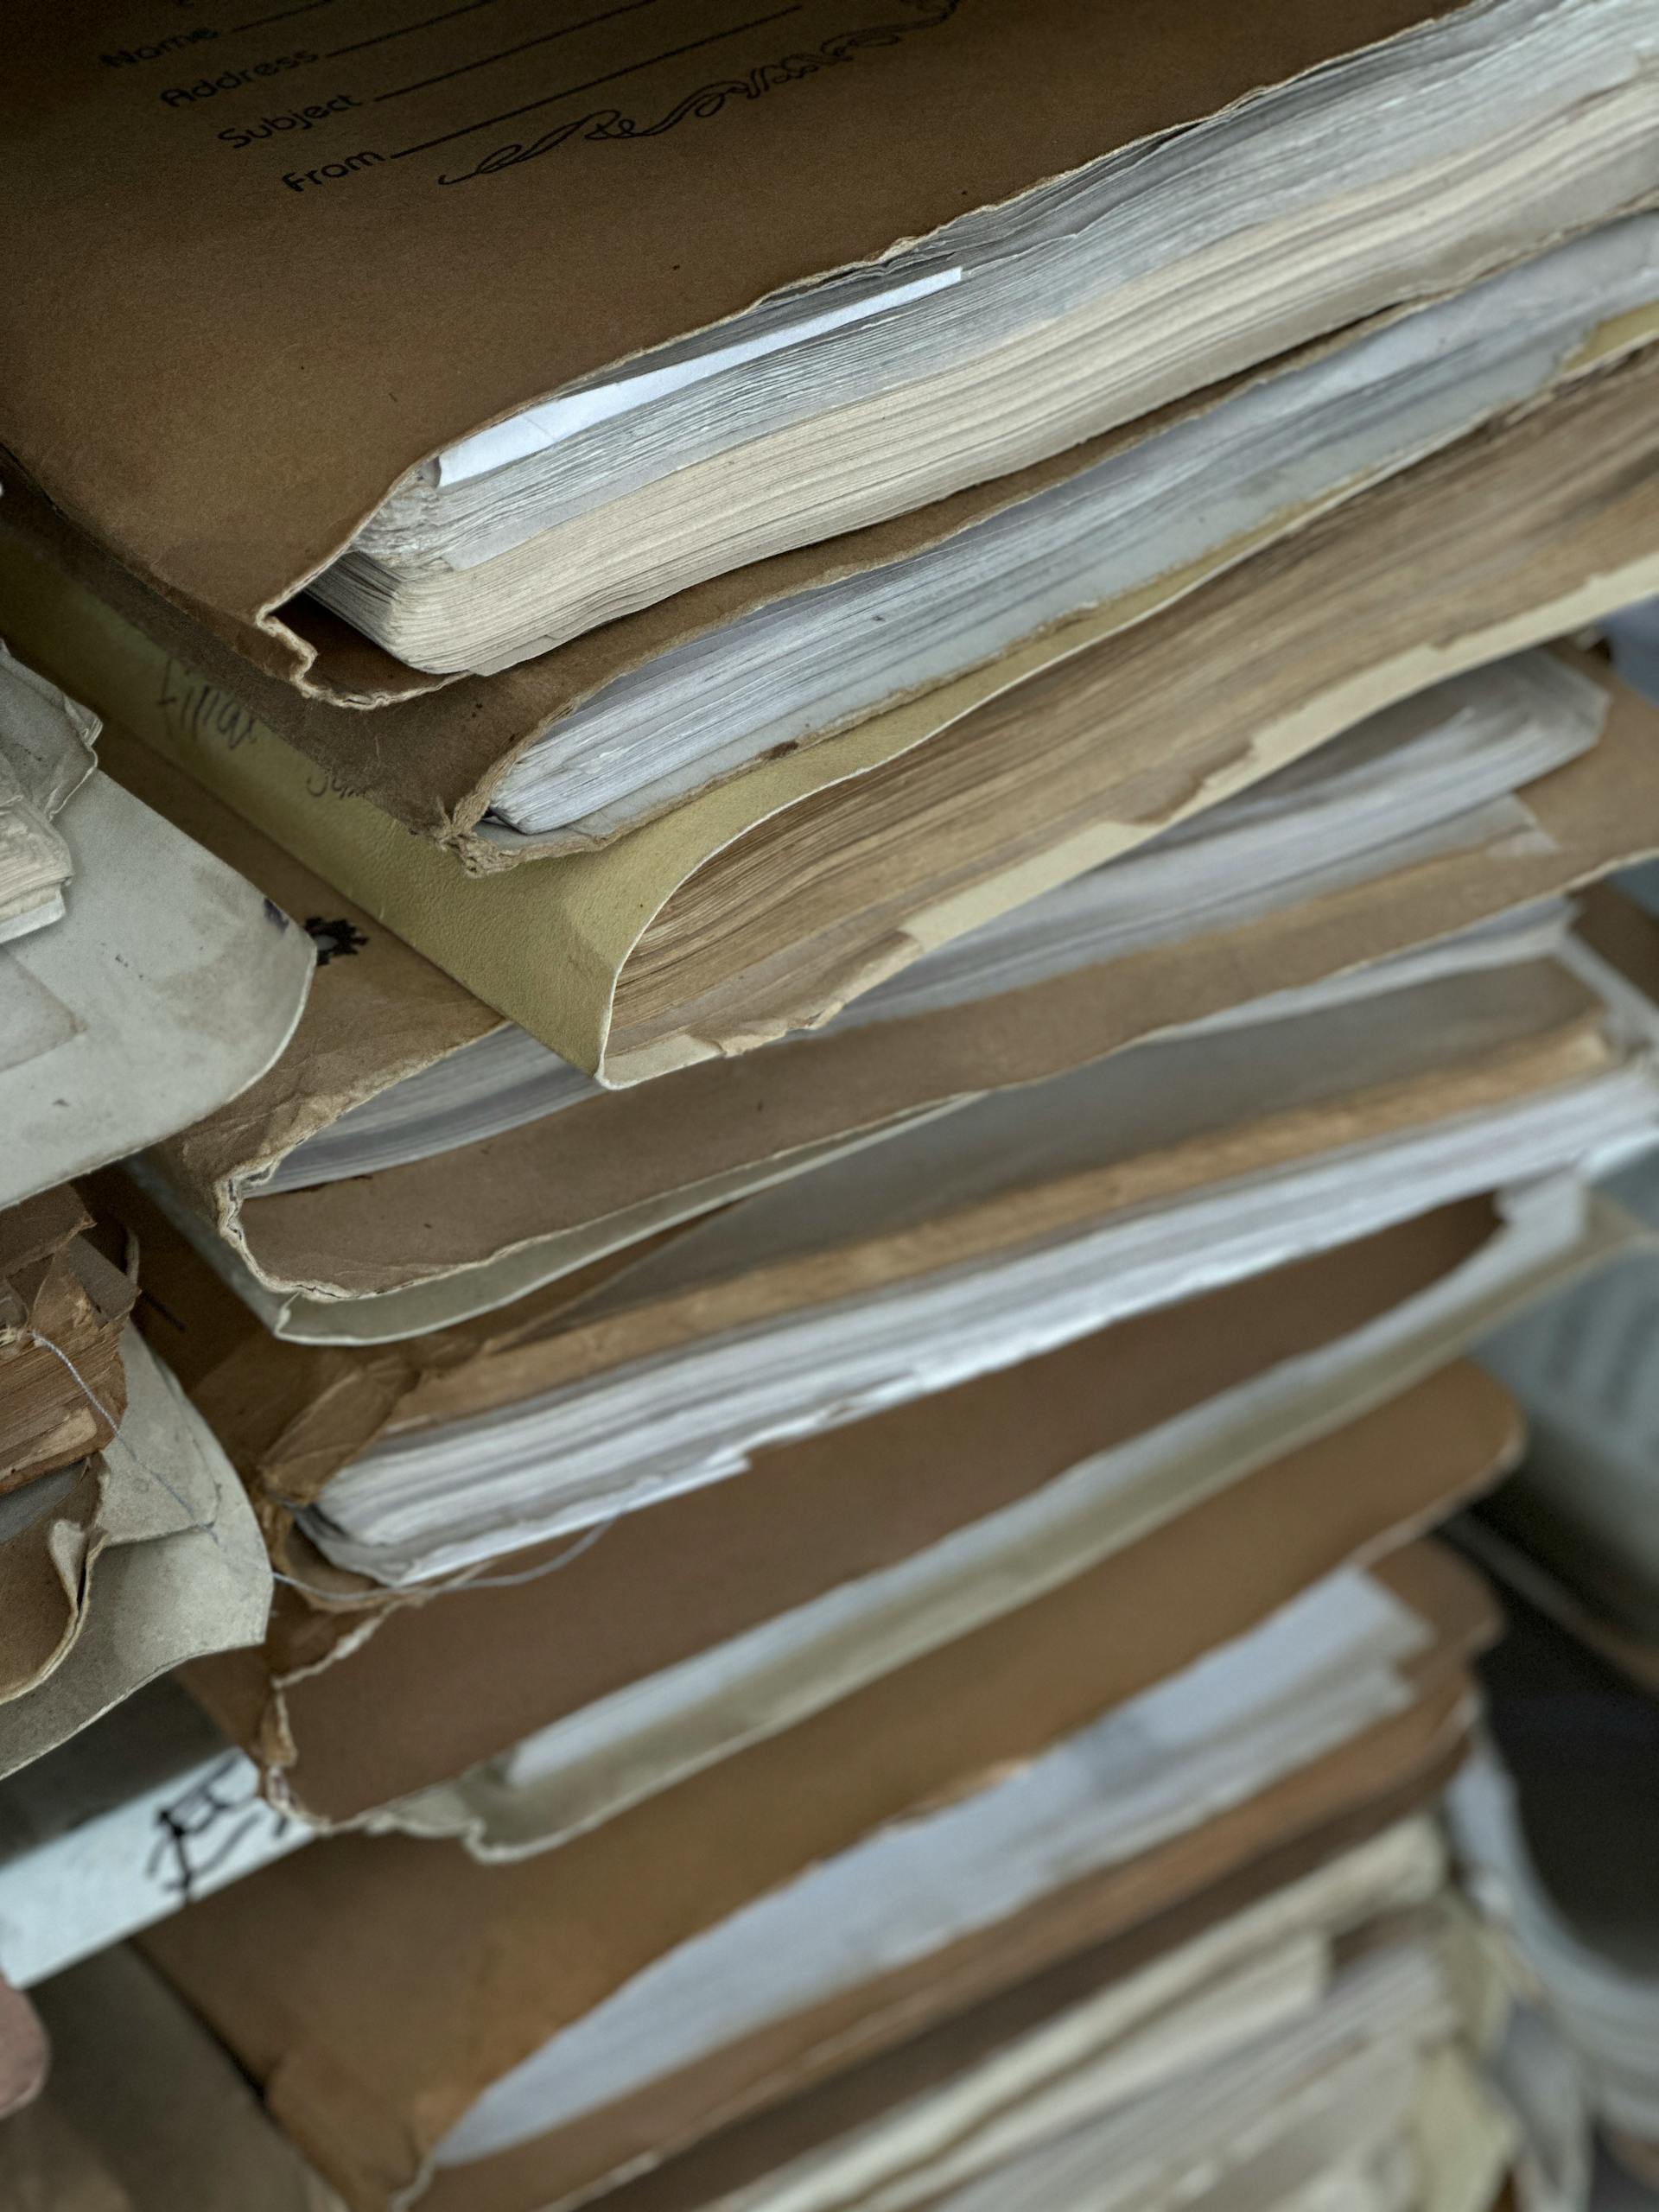 A stack of old files | Source: Pexels